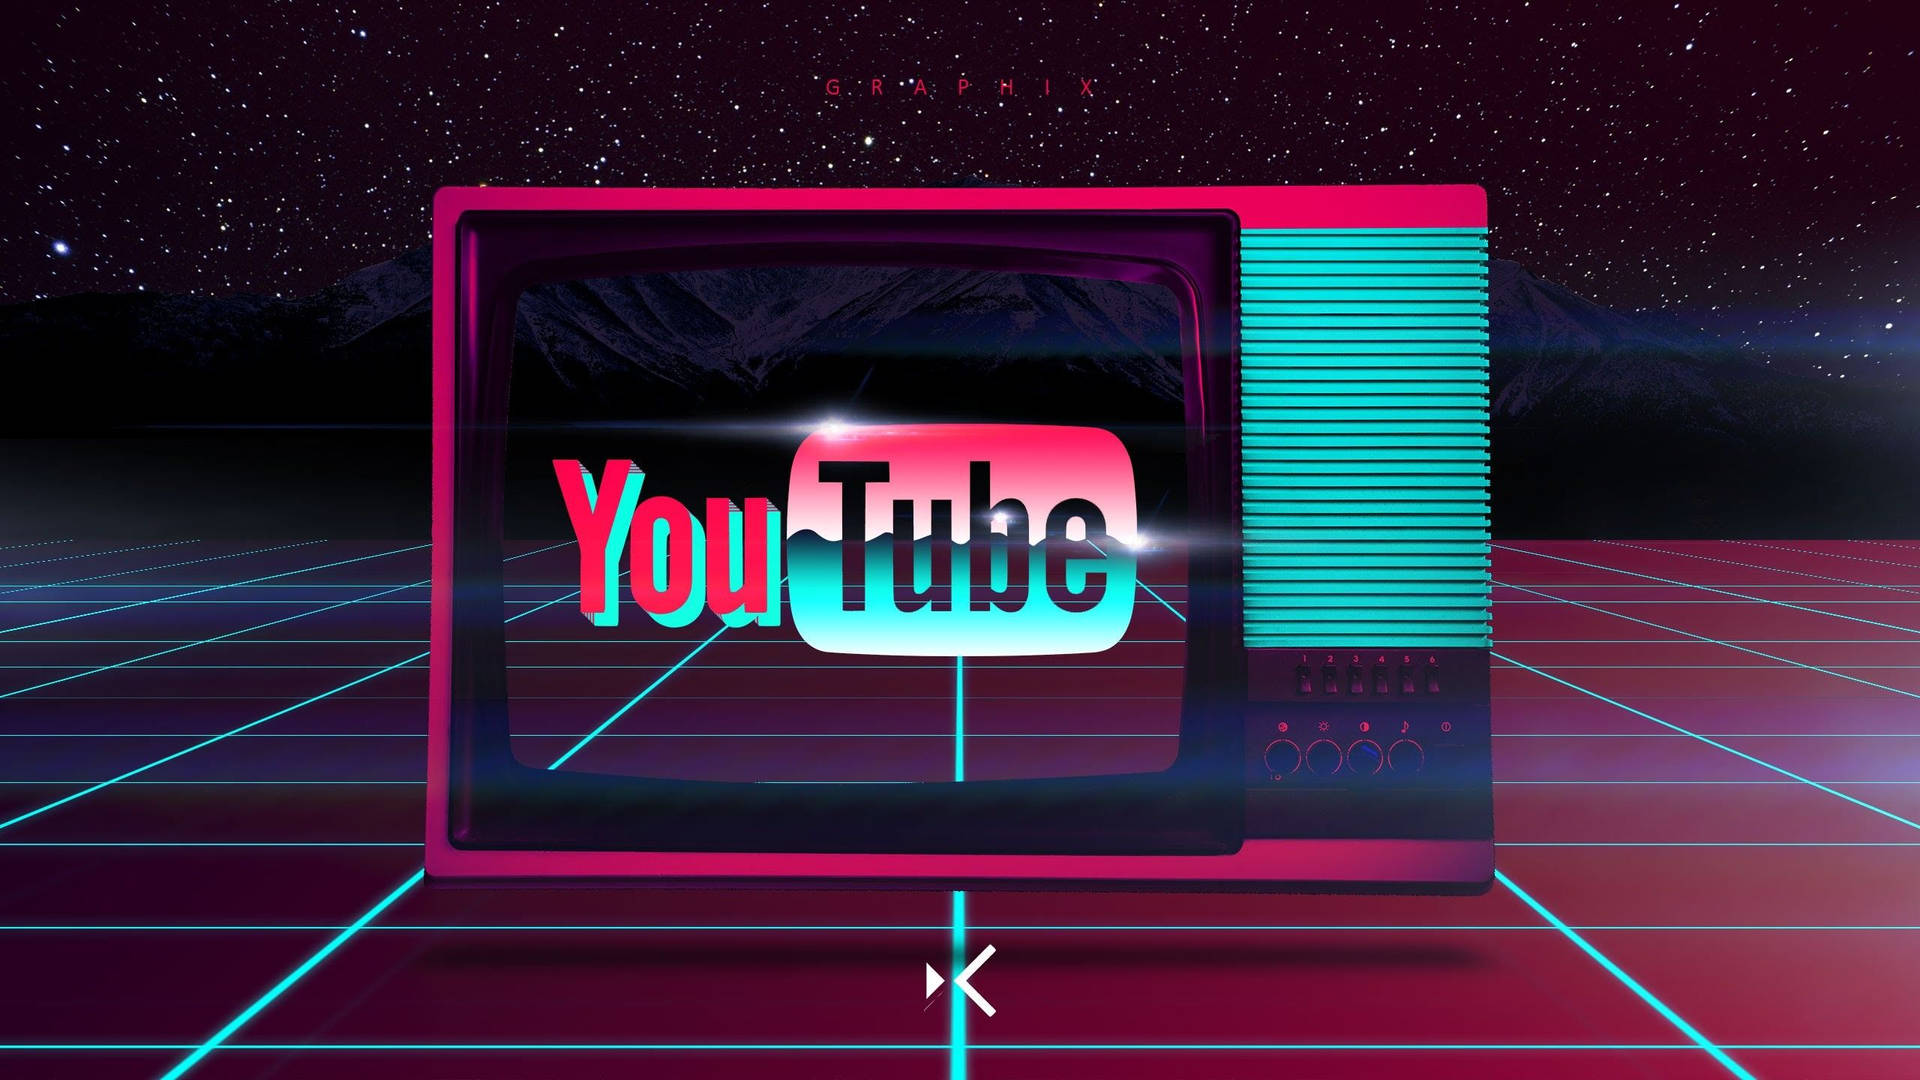 Youtube Logo On Graphic Galaxy Background